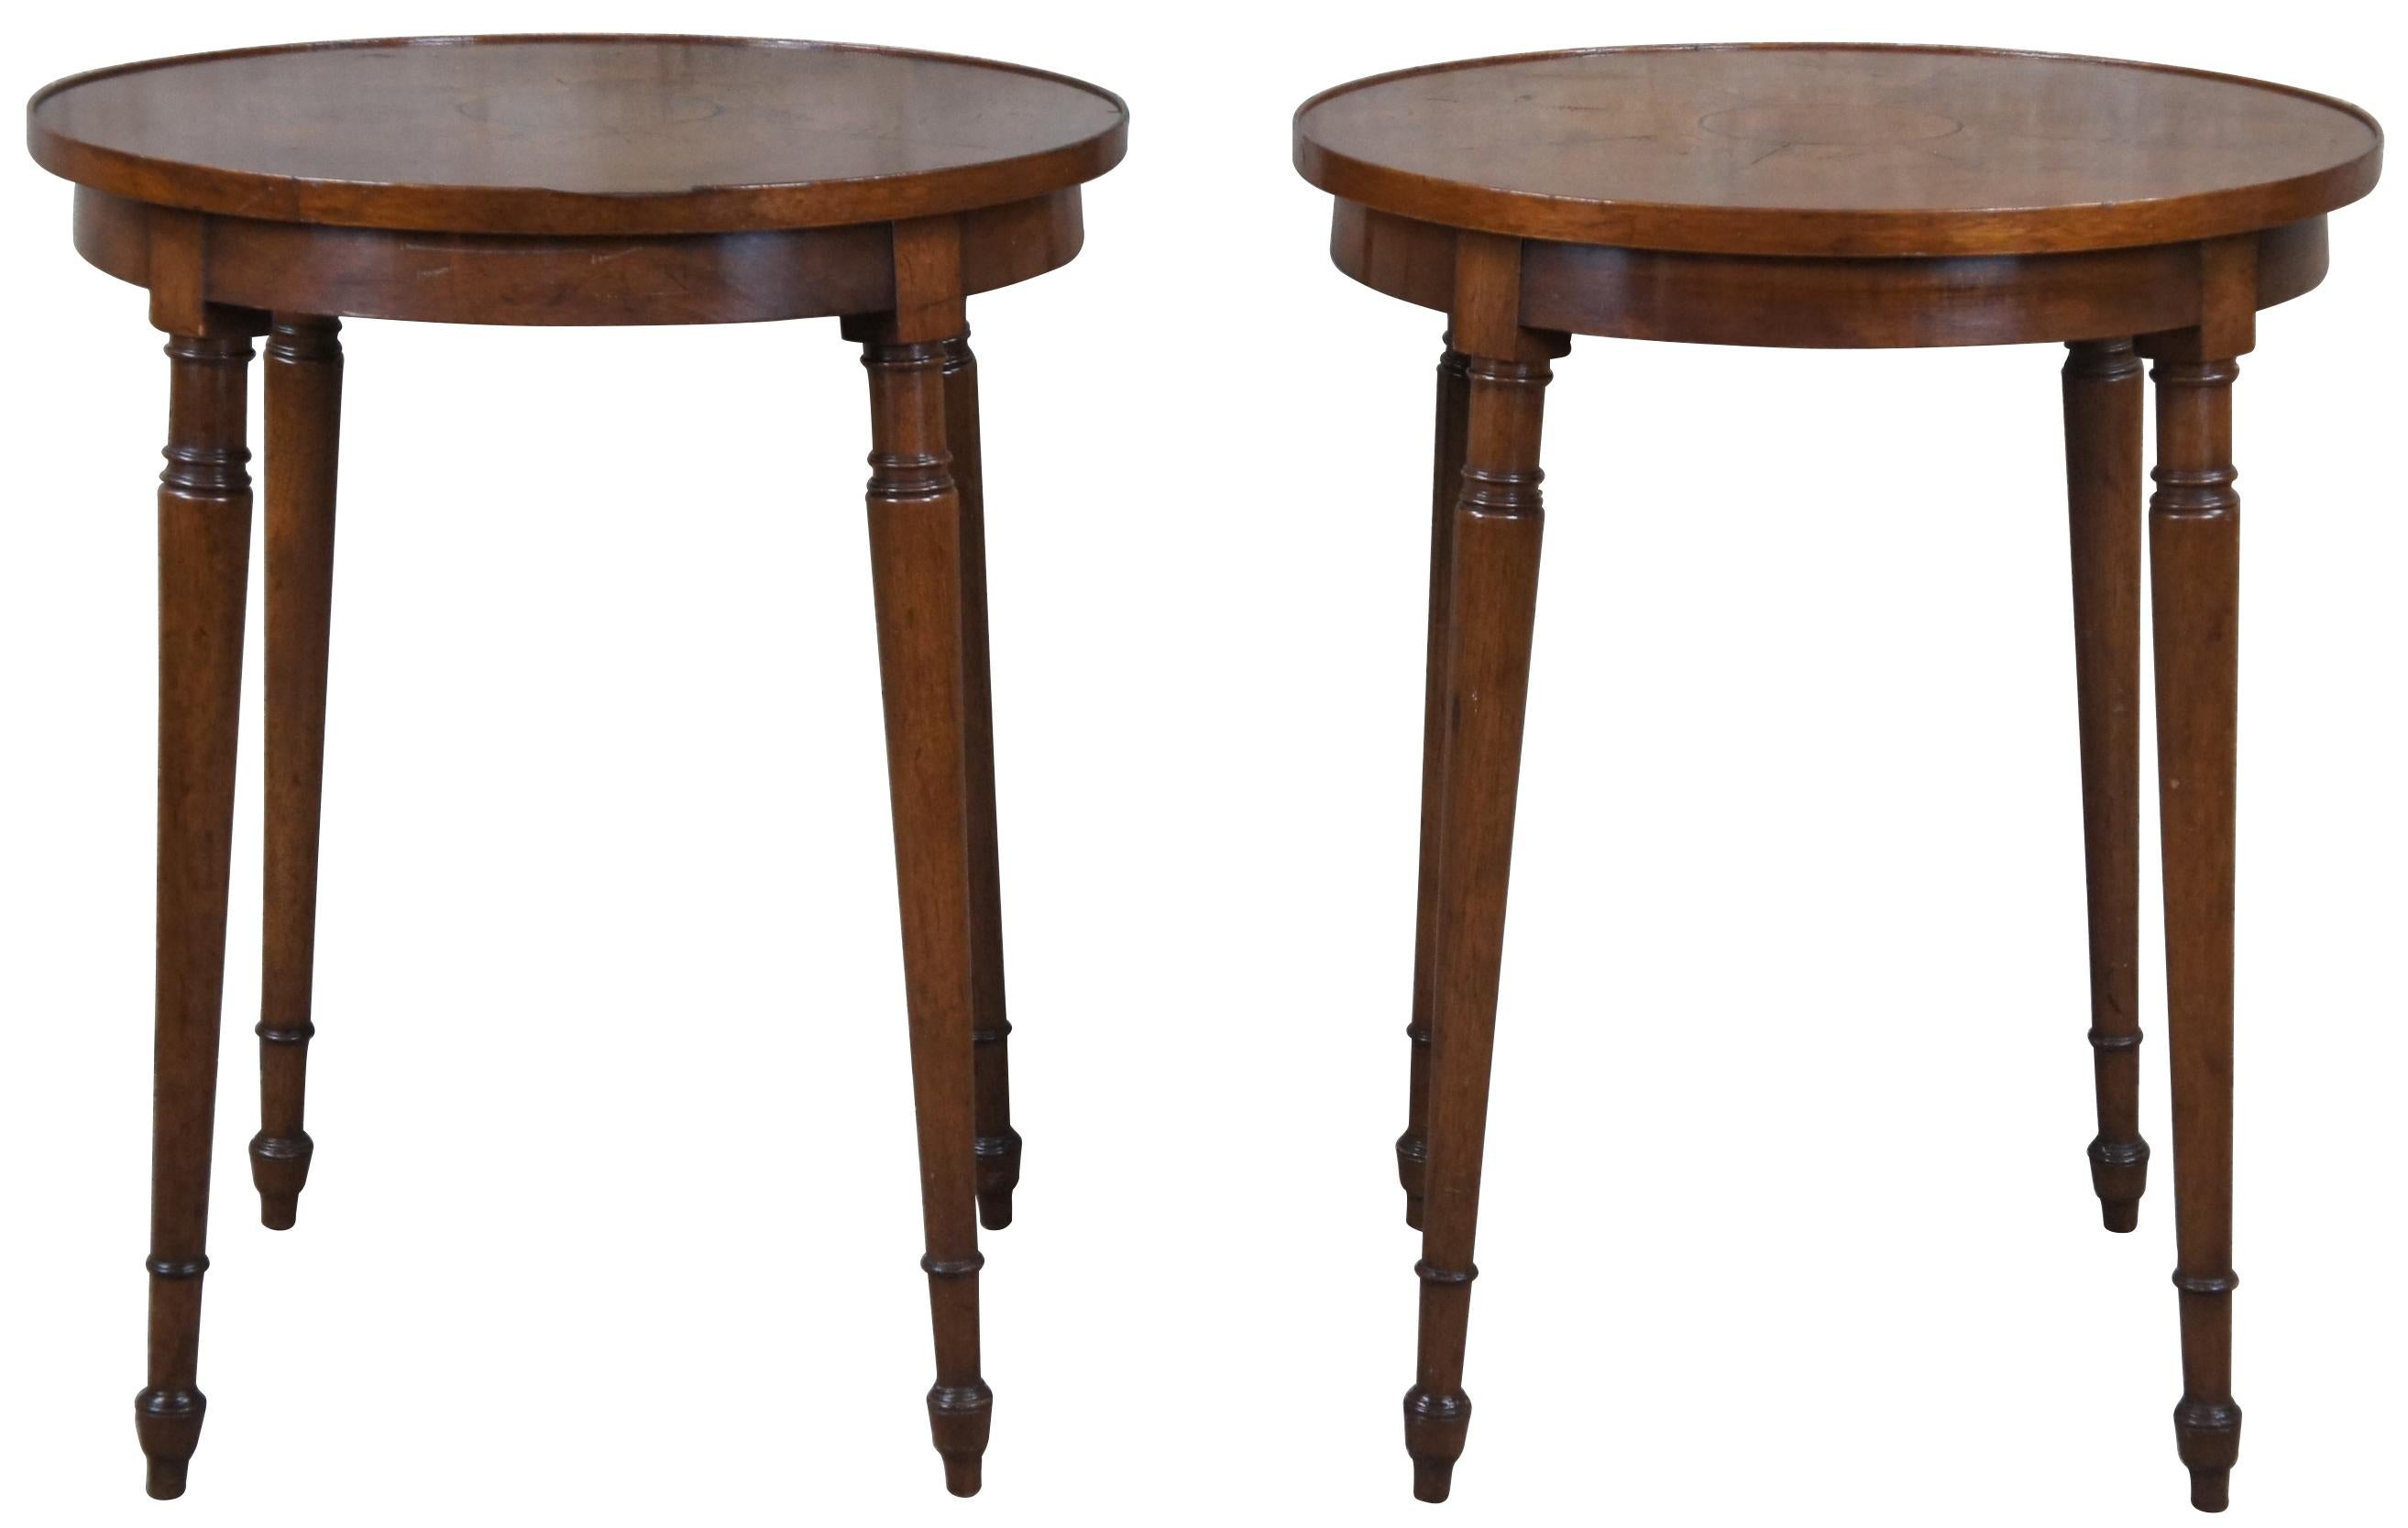 Beautiful pair of Old Colony Furniture side, end tables or nightstands. Made from walnut with a round matchbook inlaid top over flared and turned spindle legs.

Old Colony Furniture's roots go about to 1946 when they opened in Virginia. The